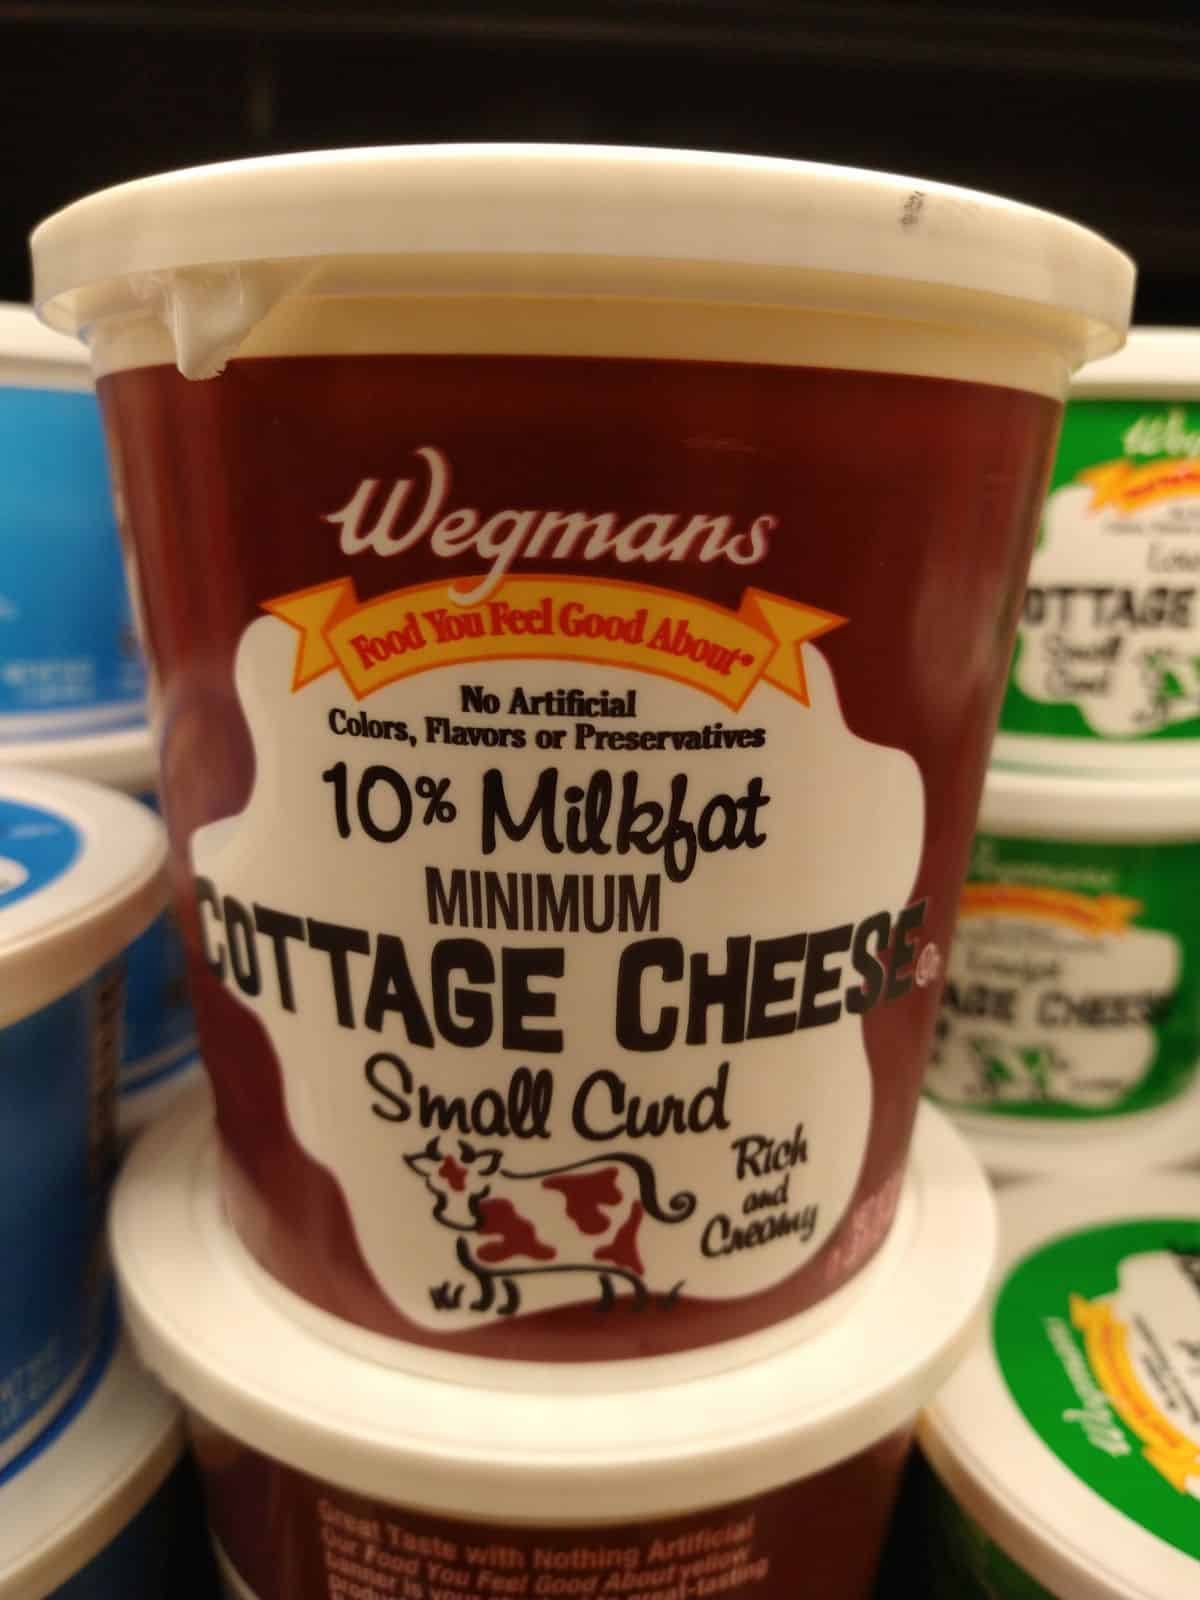 A container of Wegmans 10% milkfast cottage cheese on display.